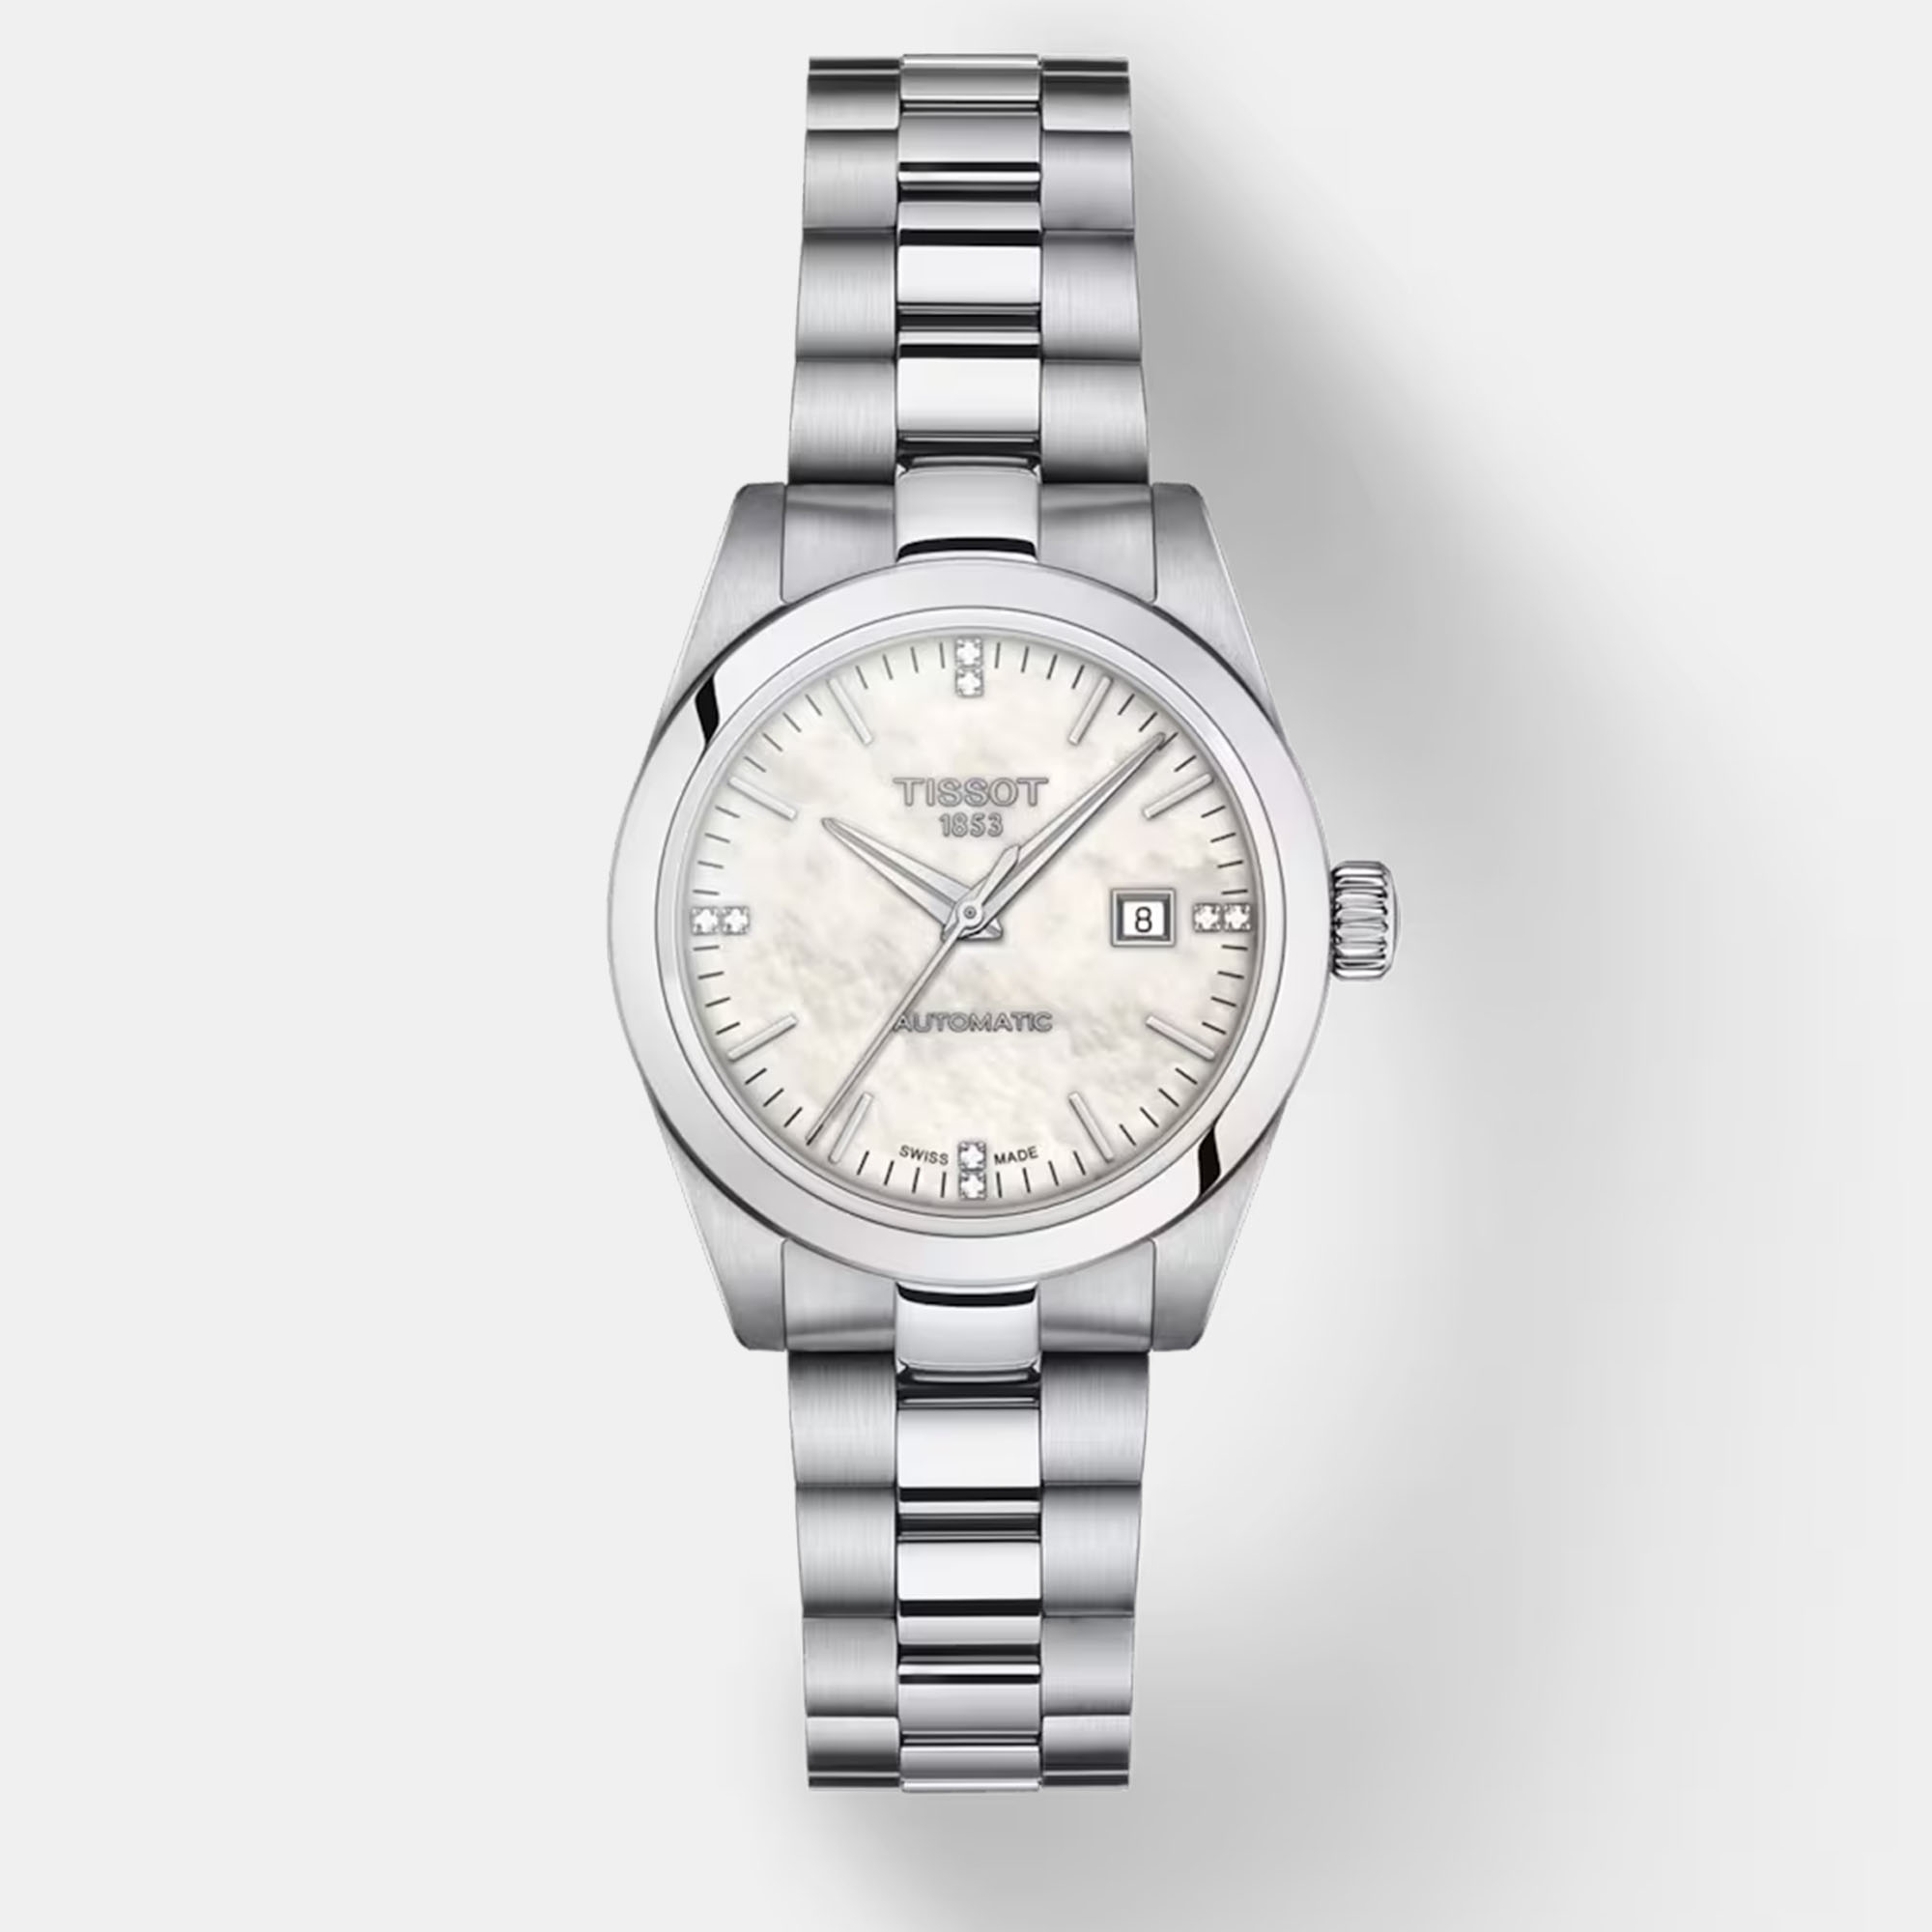 Tissot t-my lady automatic t132.007.11.116.00 silver stainlesssteel watch